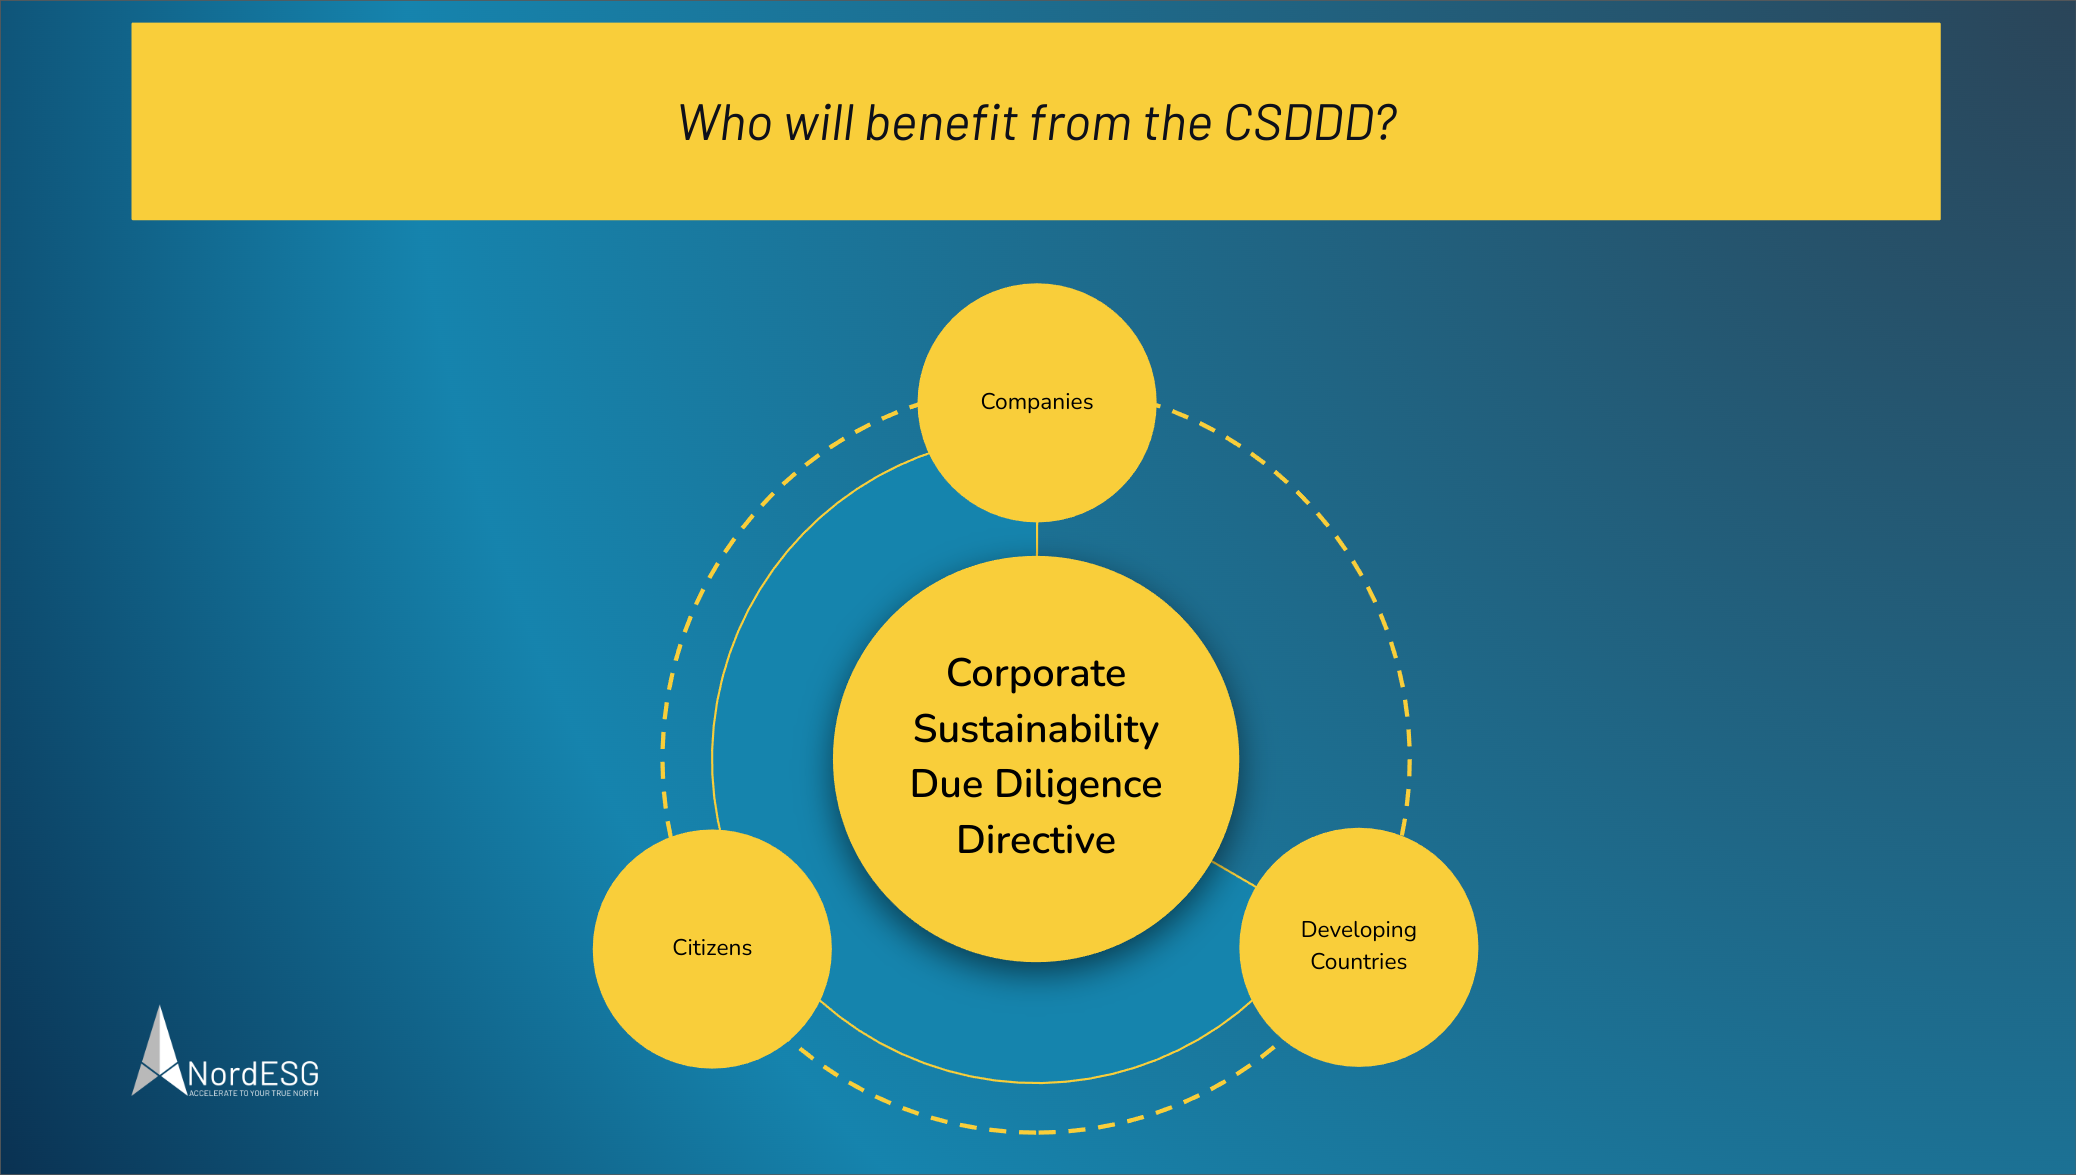 Who will benefit from the Corporate Sustainability Due Diligence Directive CSDDD